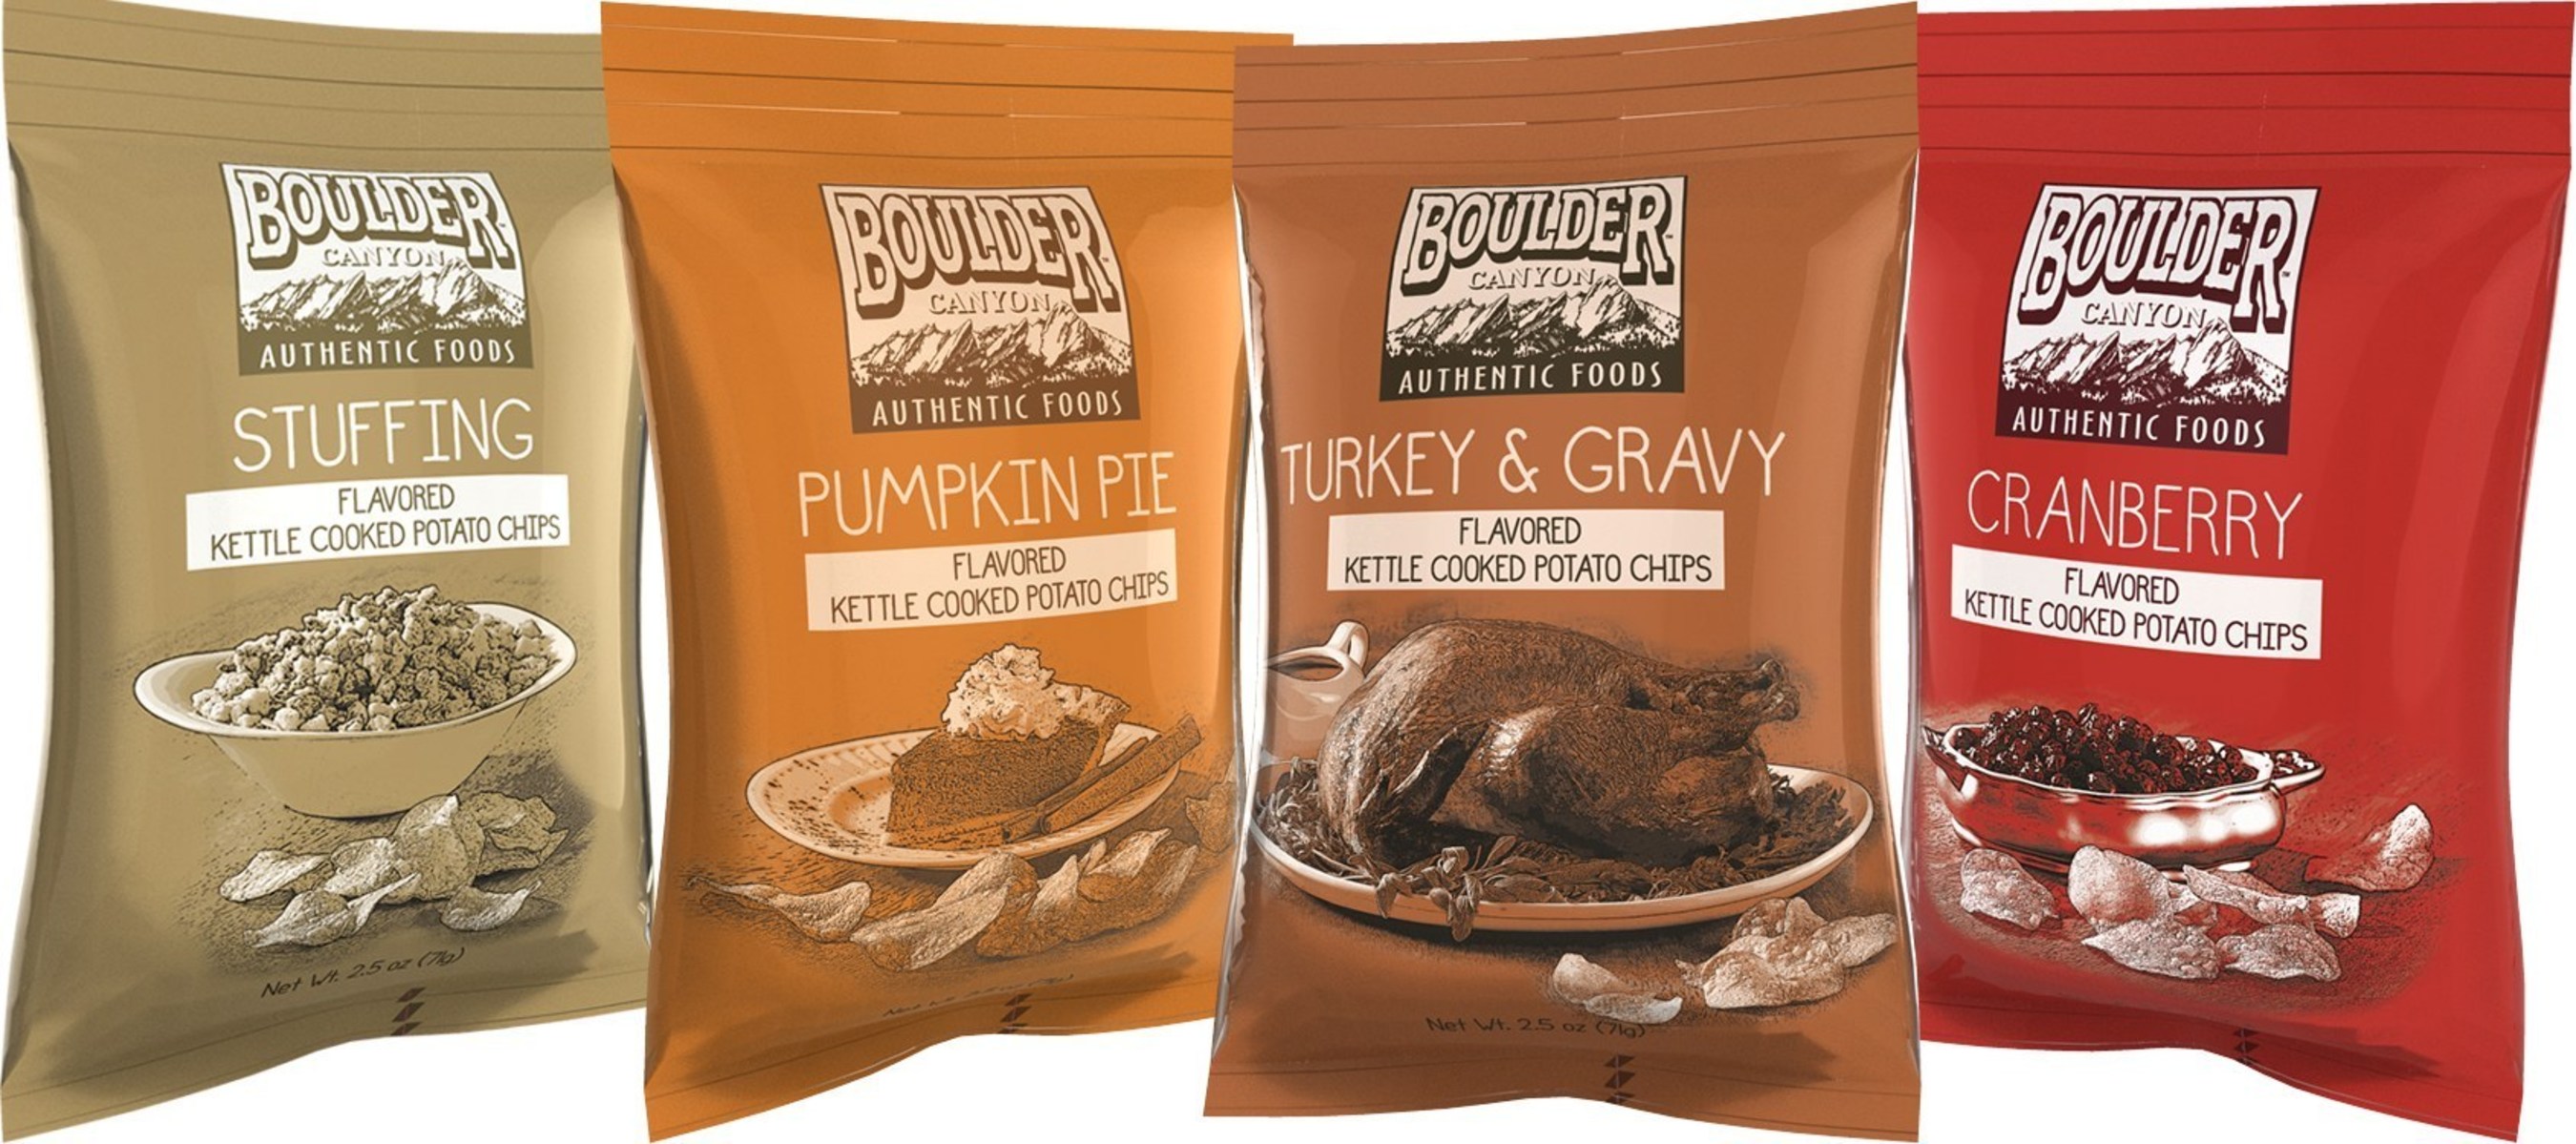 The holiday just got tastier as Boulder Canyon Foods reinvents the traditional Thanksgiving feast as kettle-cooked potato chip line